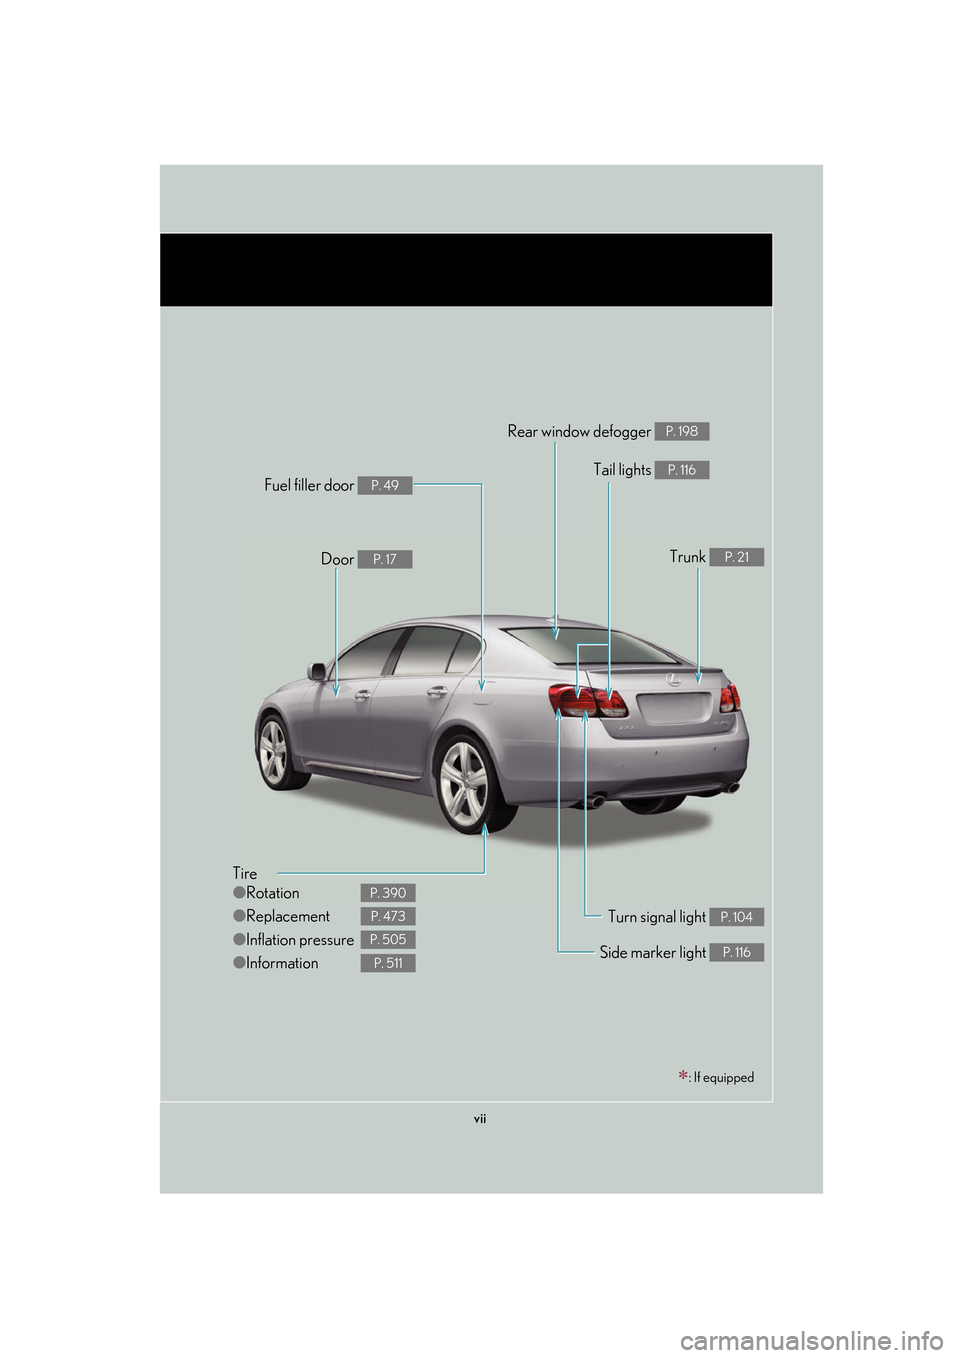 Lexus GS350 2007  Opening, closing and locking the doors / LEXUS 2007 GS430/350 OWNERS MANUAL (OM30A04U) vii
Tire
●Rotation
● Replacement
● Inflation pressure
● Information
P. 390
P. 473
P. 505
P. 511
Tail lights P. 116
Side marker light P. 116
Trunk P. 21
Rear window defogger P. 198
Door P. 17
F